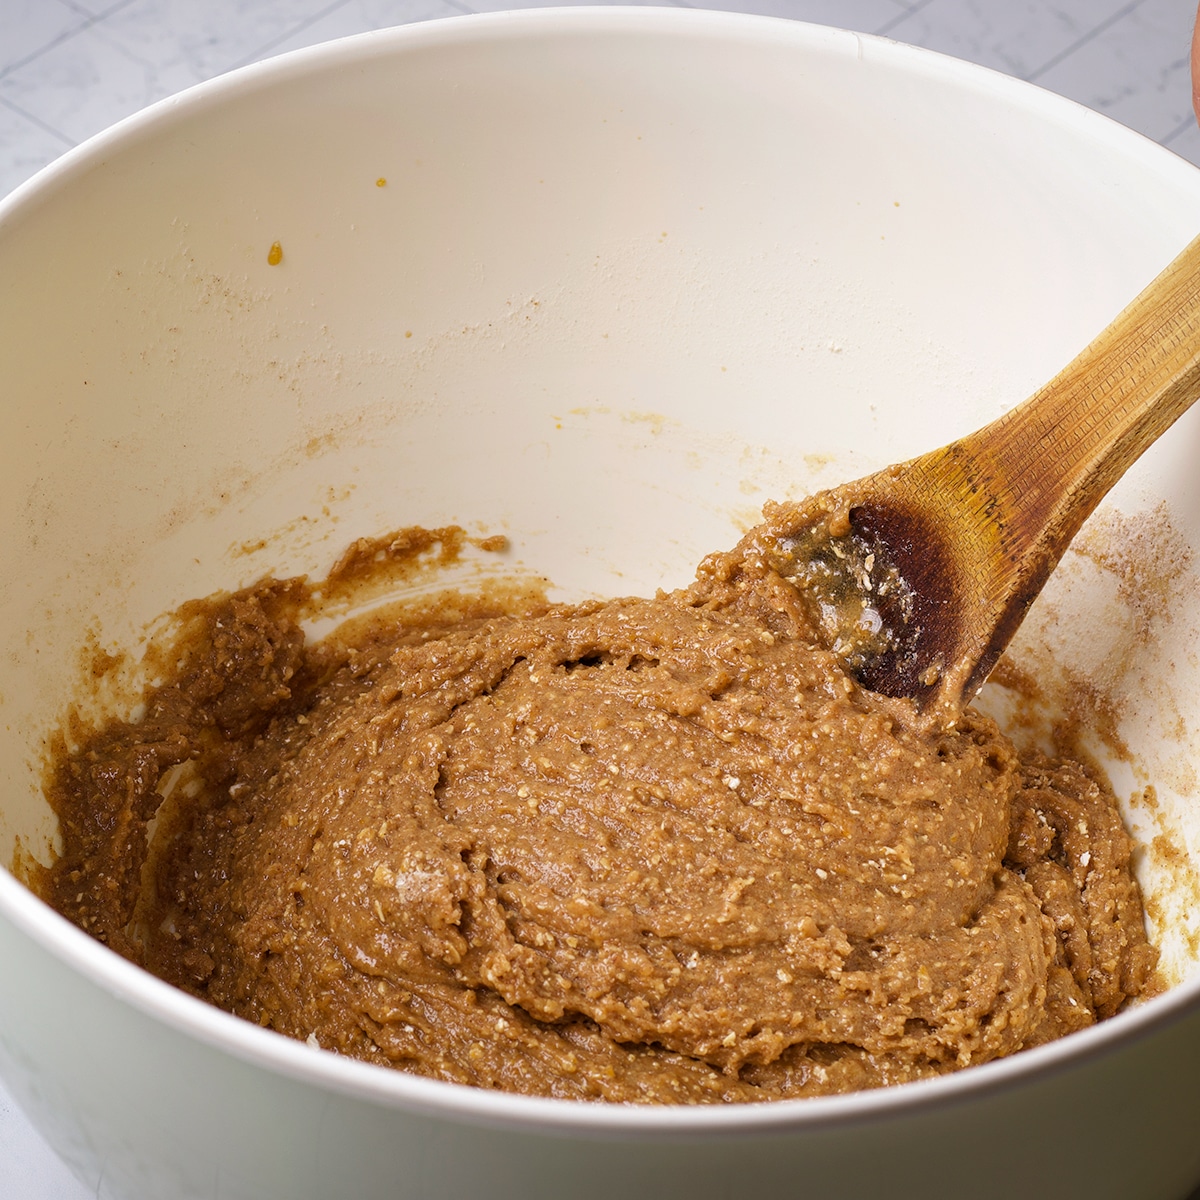 Using a wooden spoon to mix the wet and dry ingredients for muffin batter.